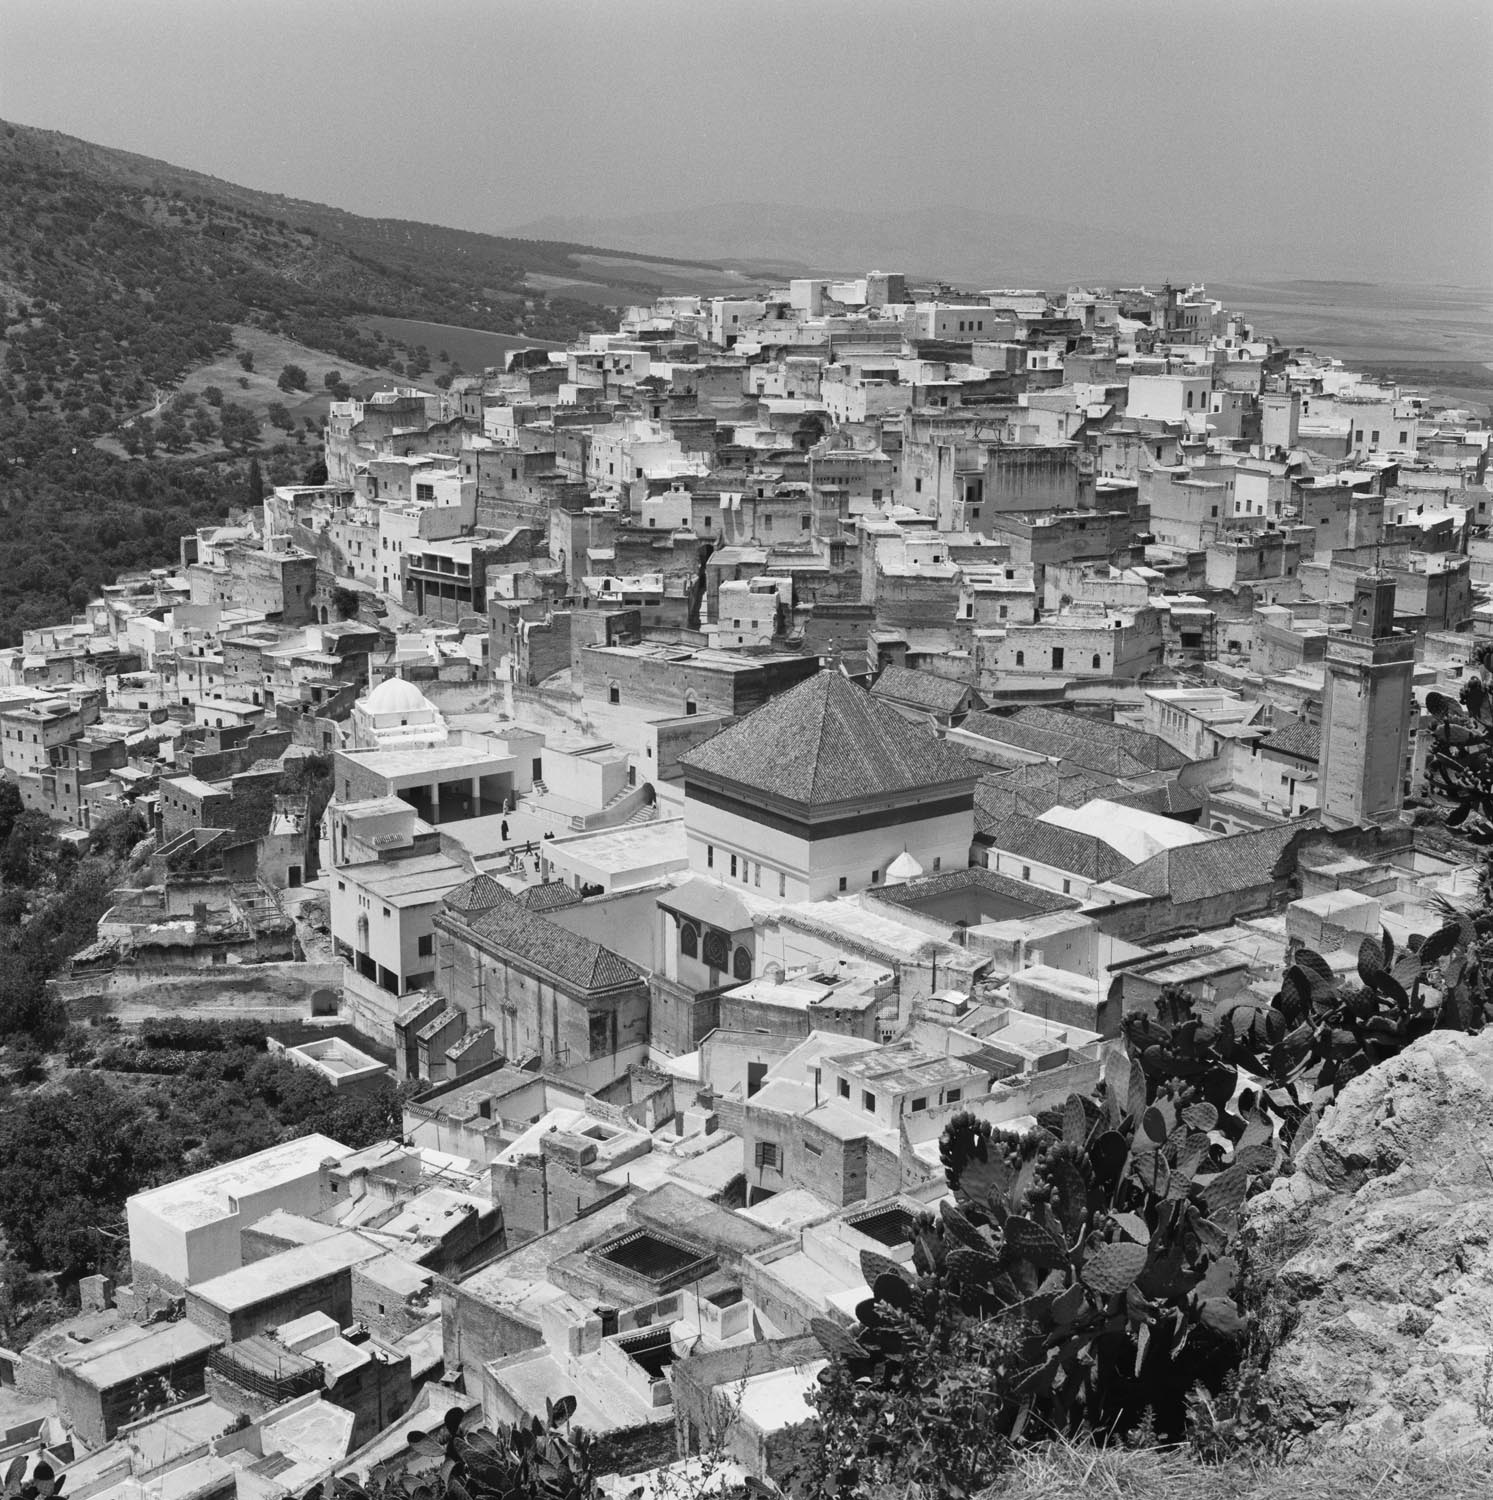 Bird's eye view of the Shrine of Moulay Idris